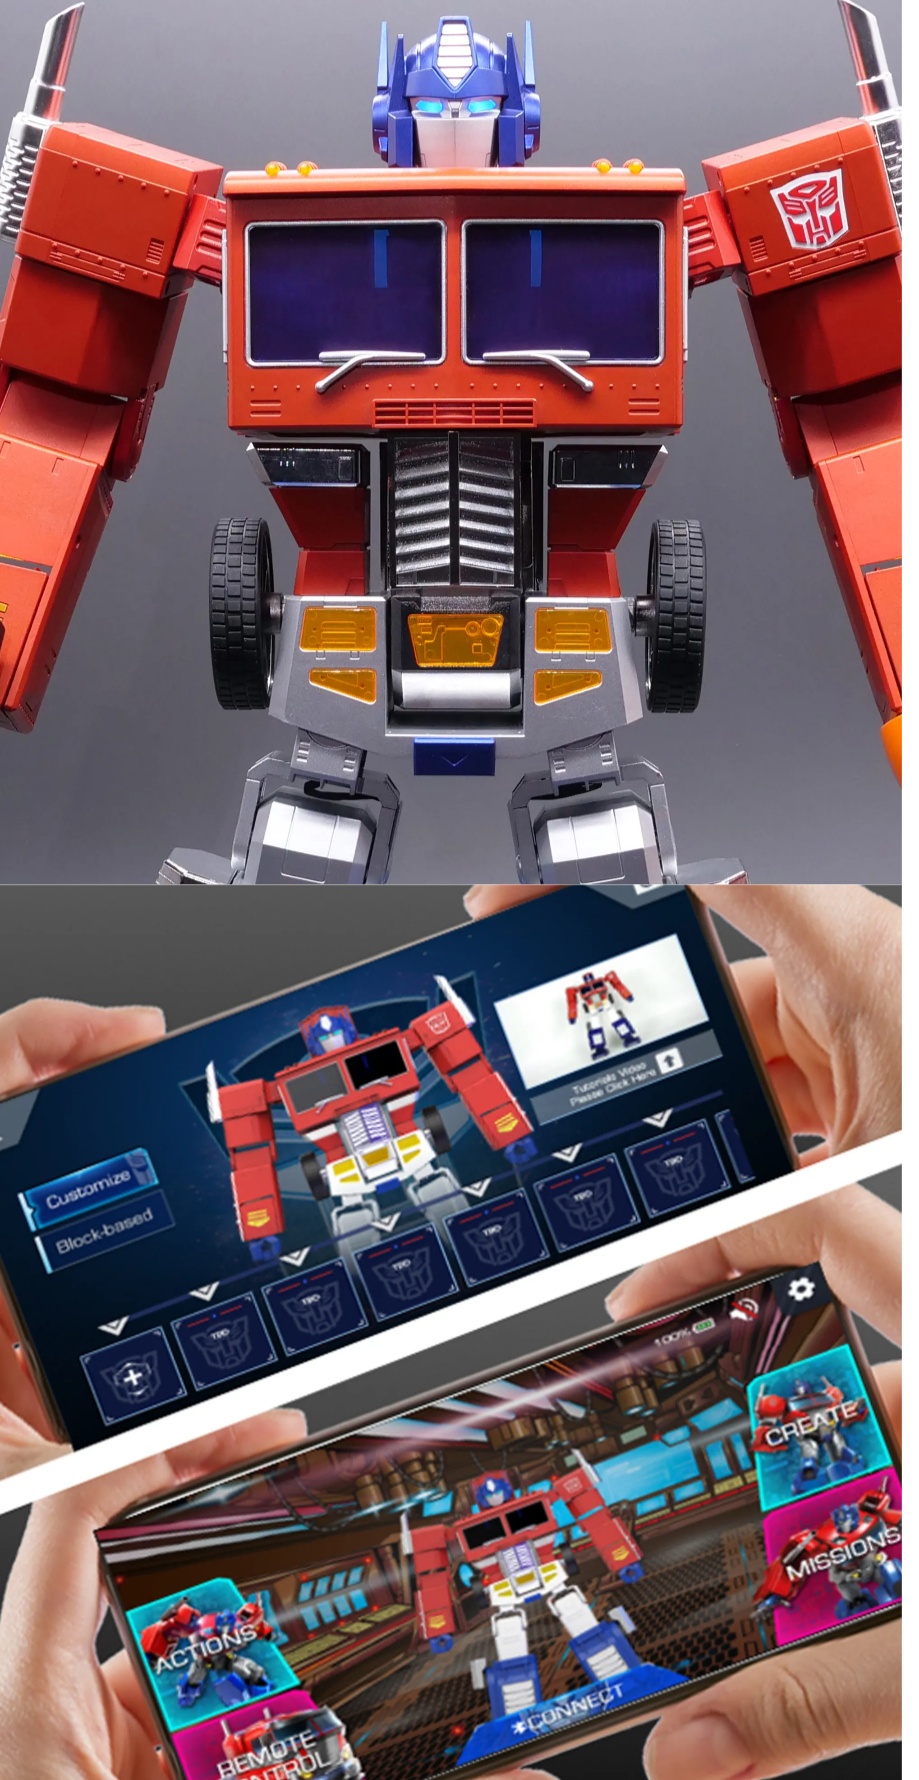 Here comes the Transformer toy.